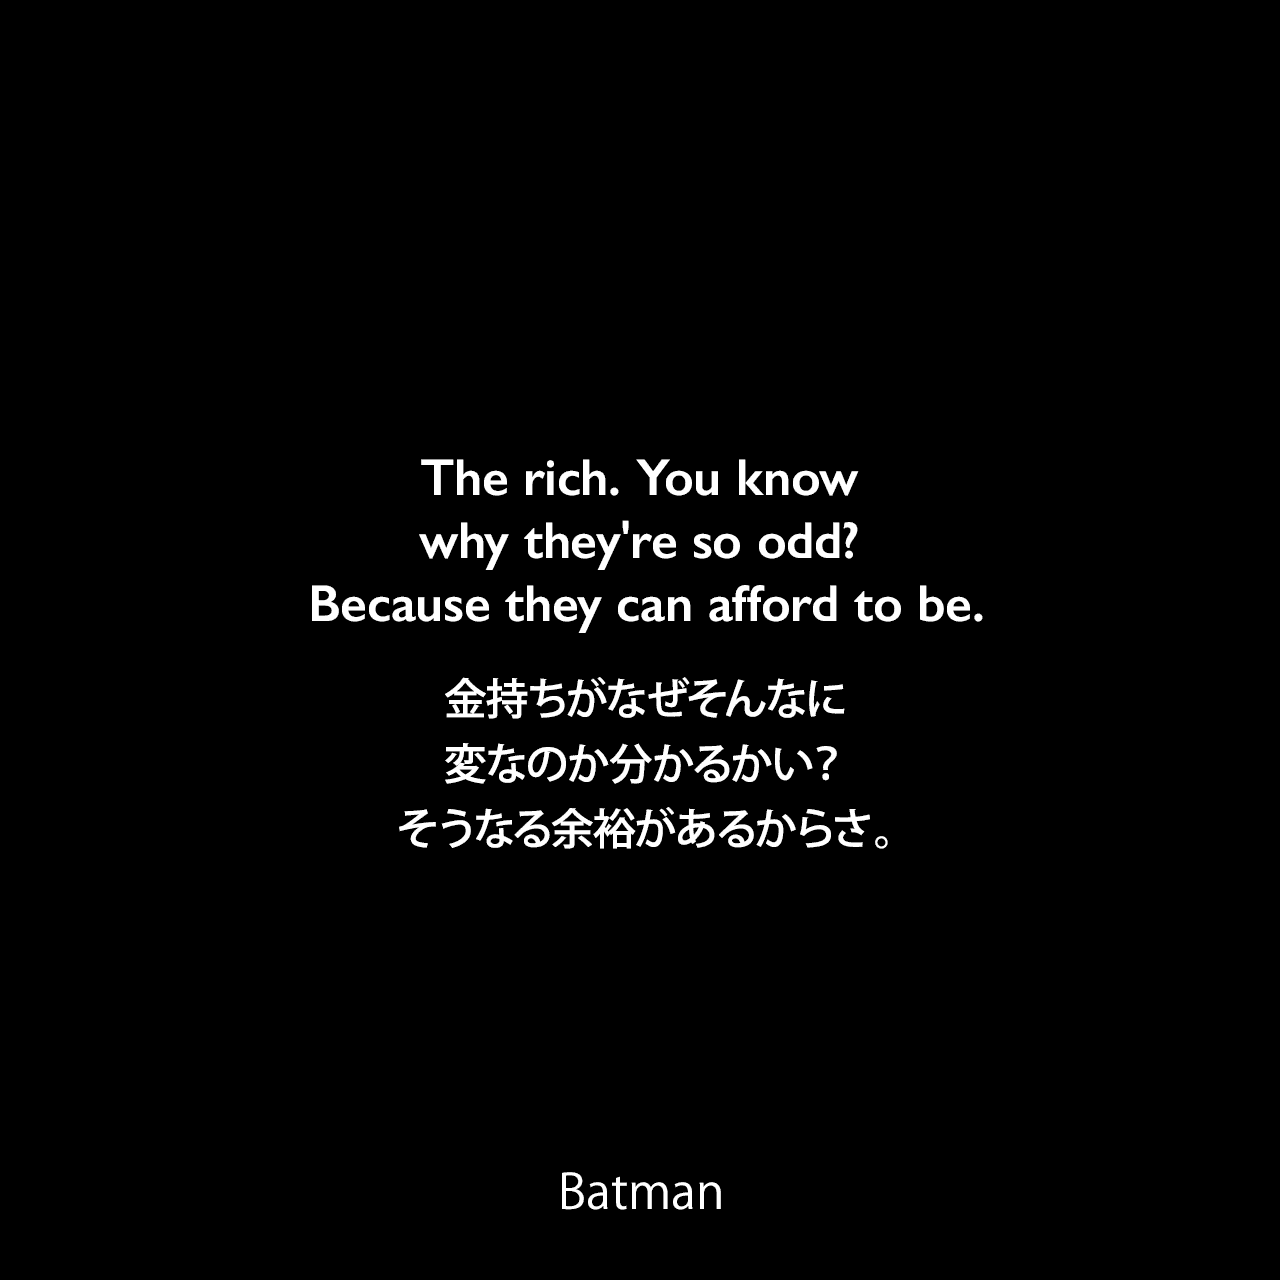 The rich. You know why they're so odd? Because they can afford to be.金持ちがなぜそんなに変なのか分かるかい？そうなる余裕があるからさ。- Alexander Knox 